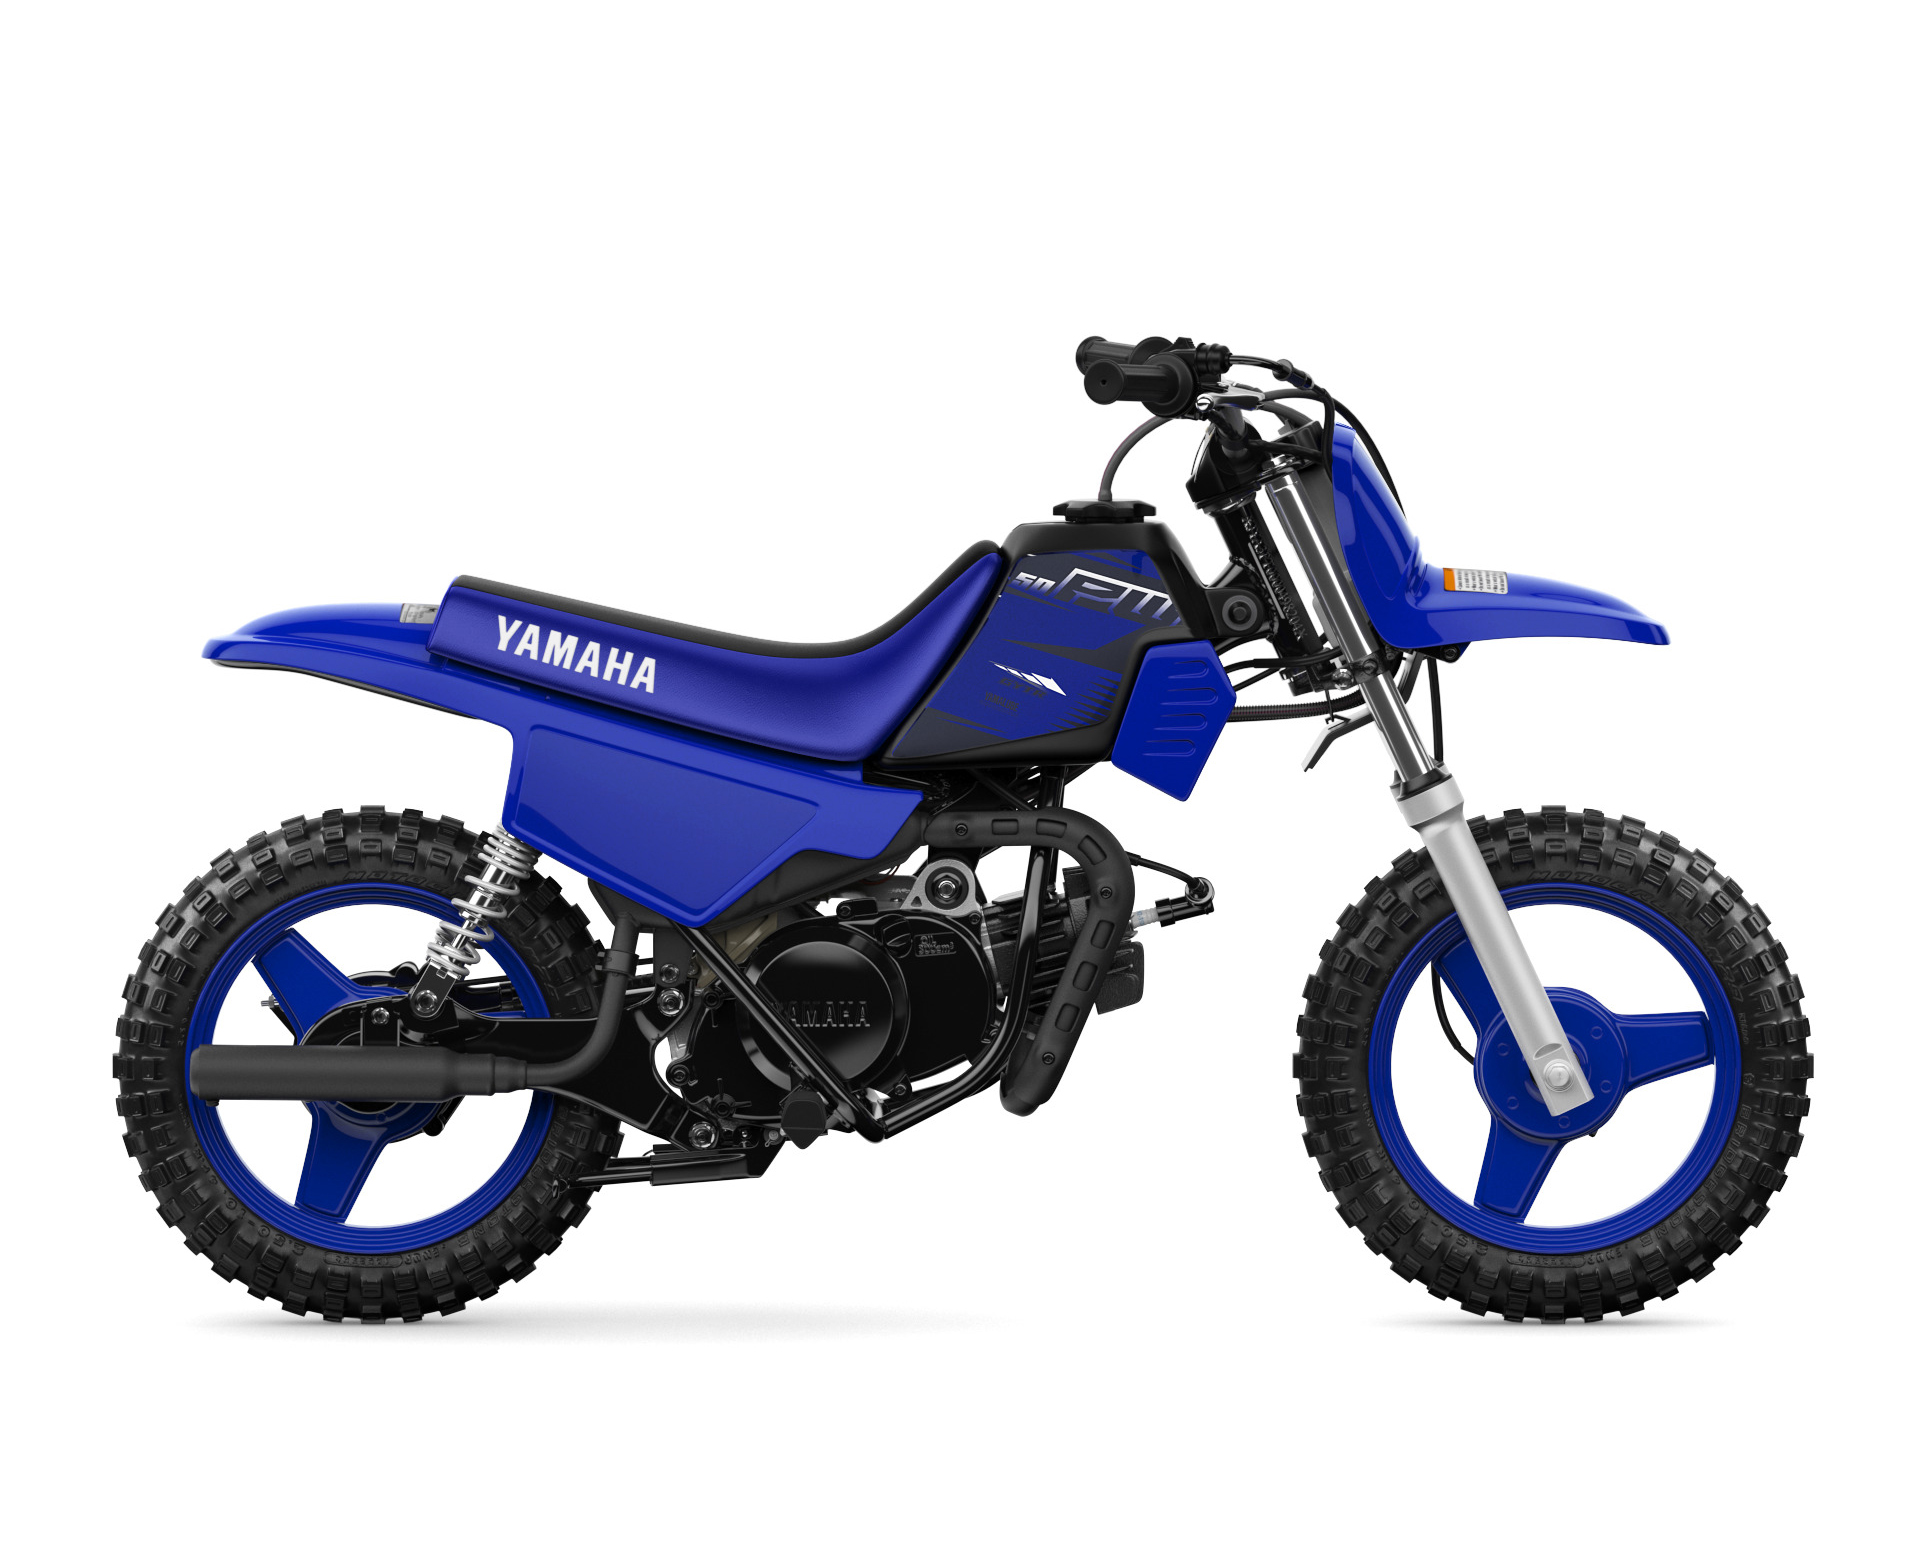 Thumbnail of your customized 2023 PW50